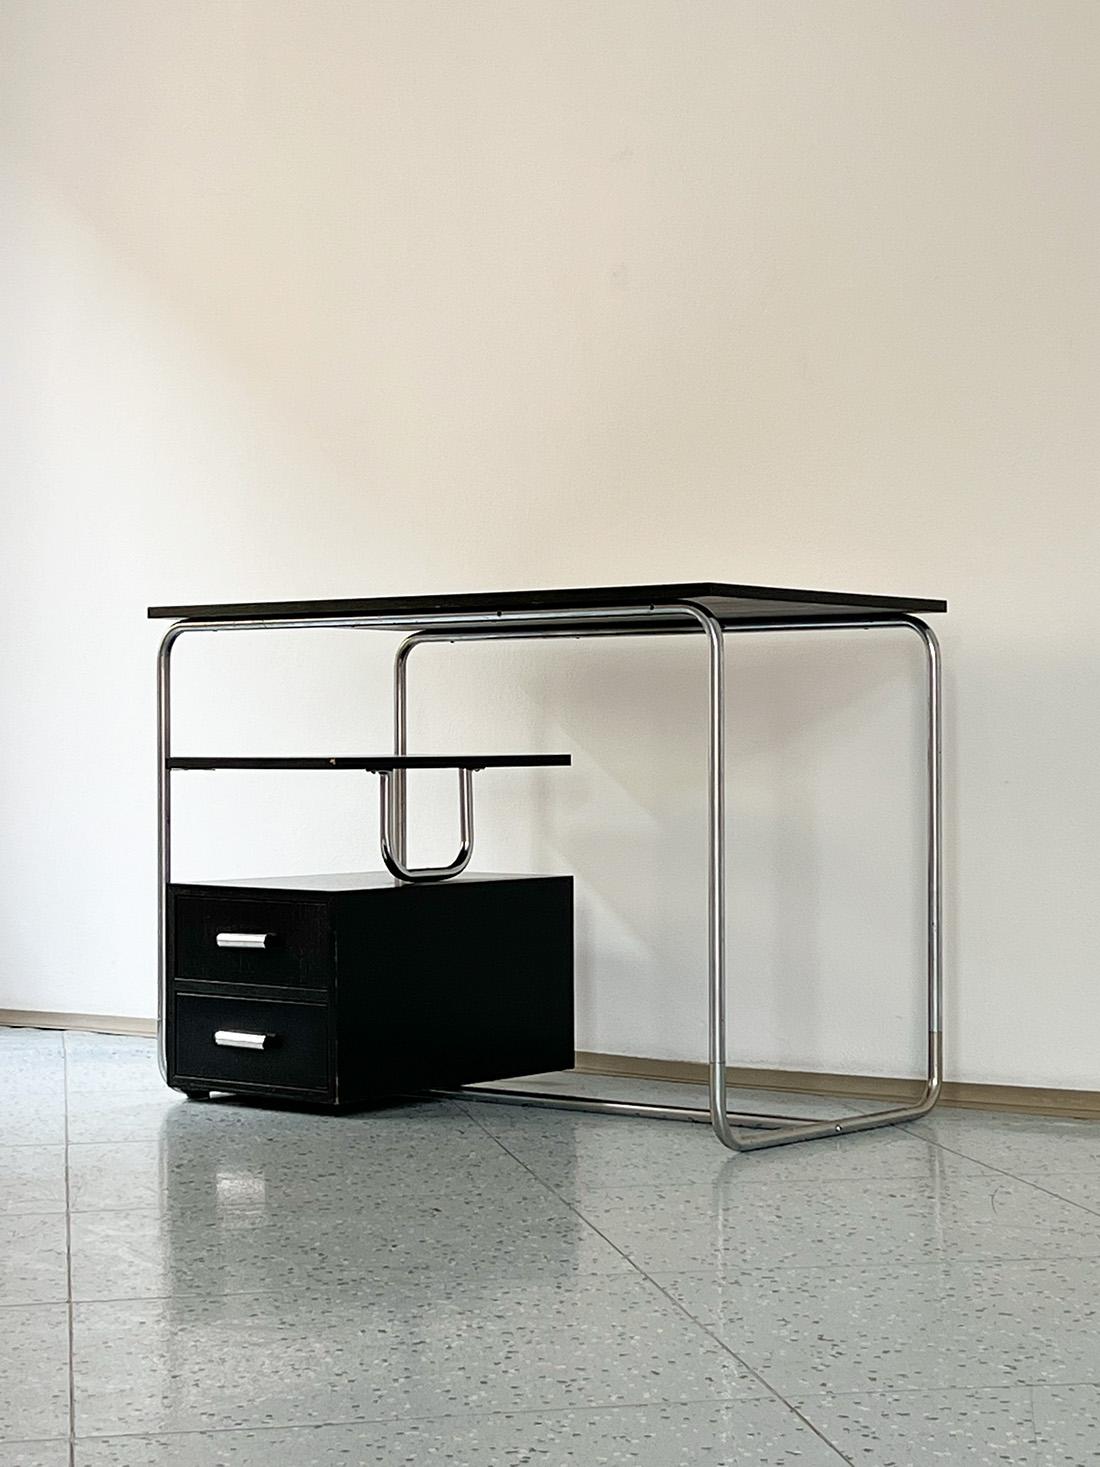 Bauhaus tubular steel and wood desk, made in Germany, 1930s.

Date of manufacture: 1930s
Origin: Germany
Material: Chrome-plated steel, Wood
Dimensions: H 78 cm x W 108 cm x D 58 cm
Condition: In original condition, with patina consistent with age